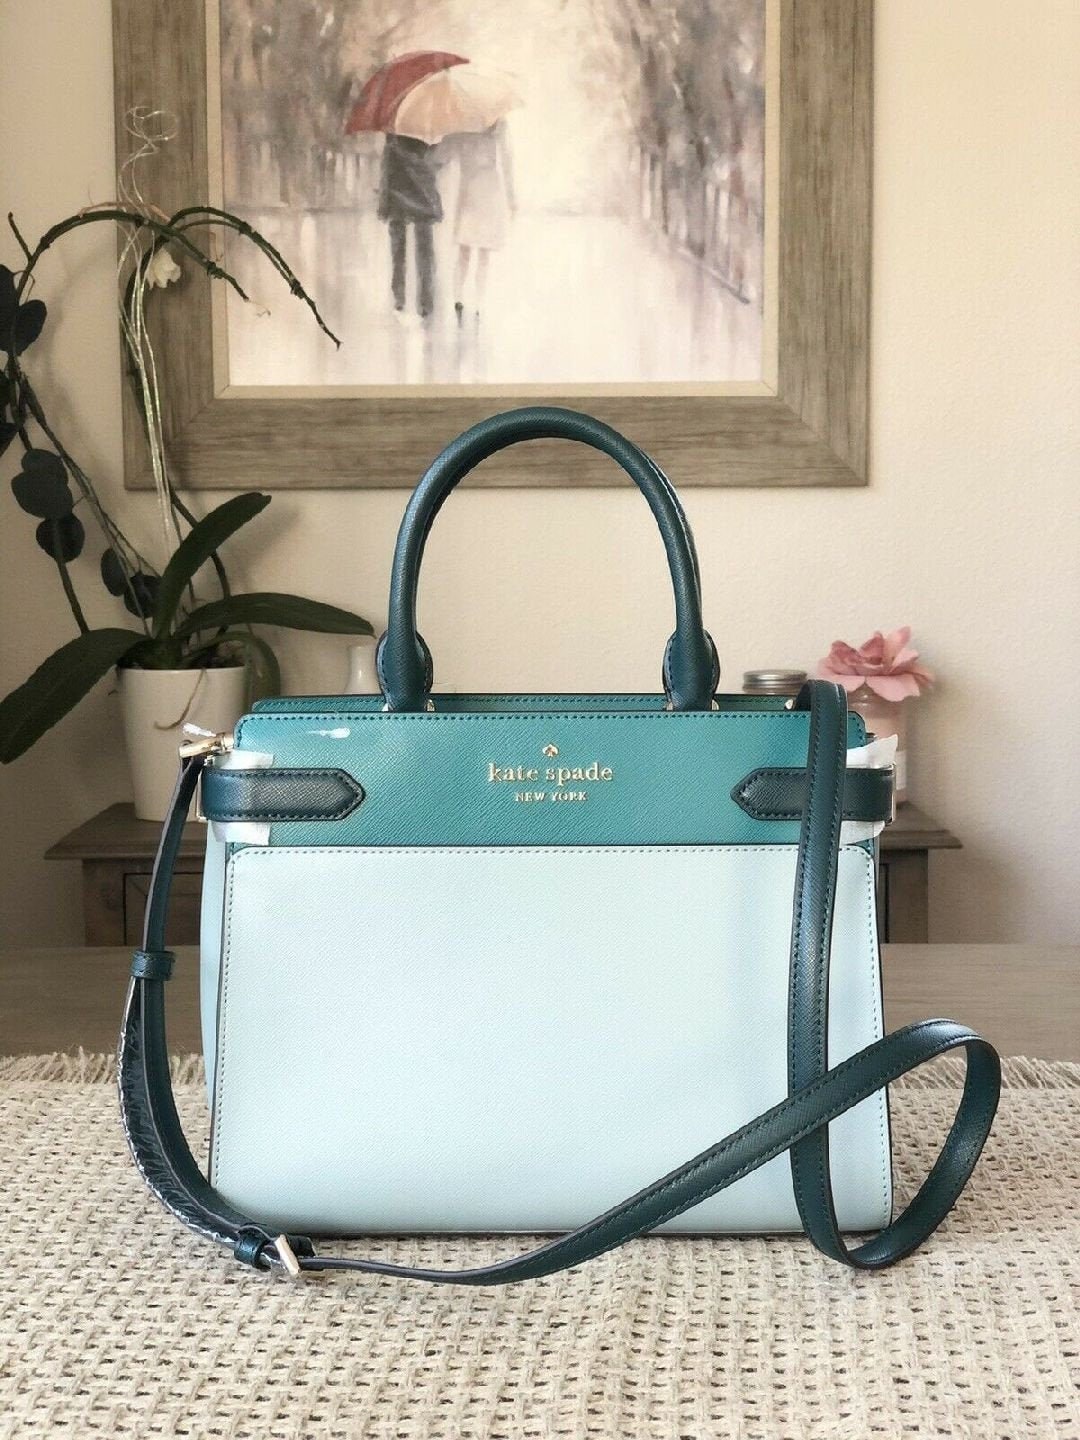 Kate Spade Staci Colorblock Small Satchel Bag in Blue